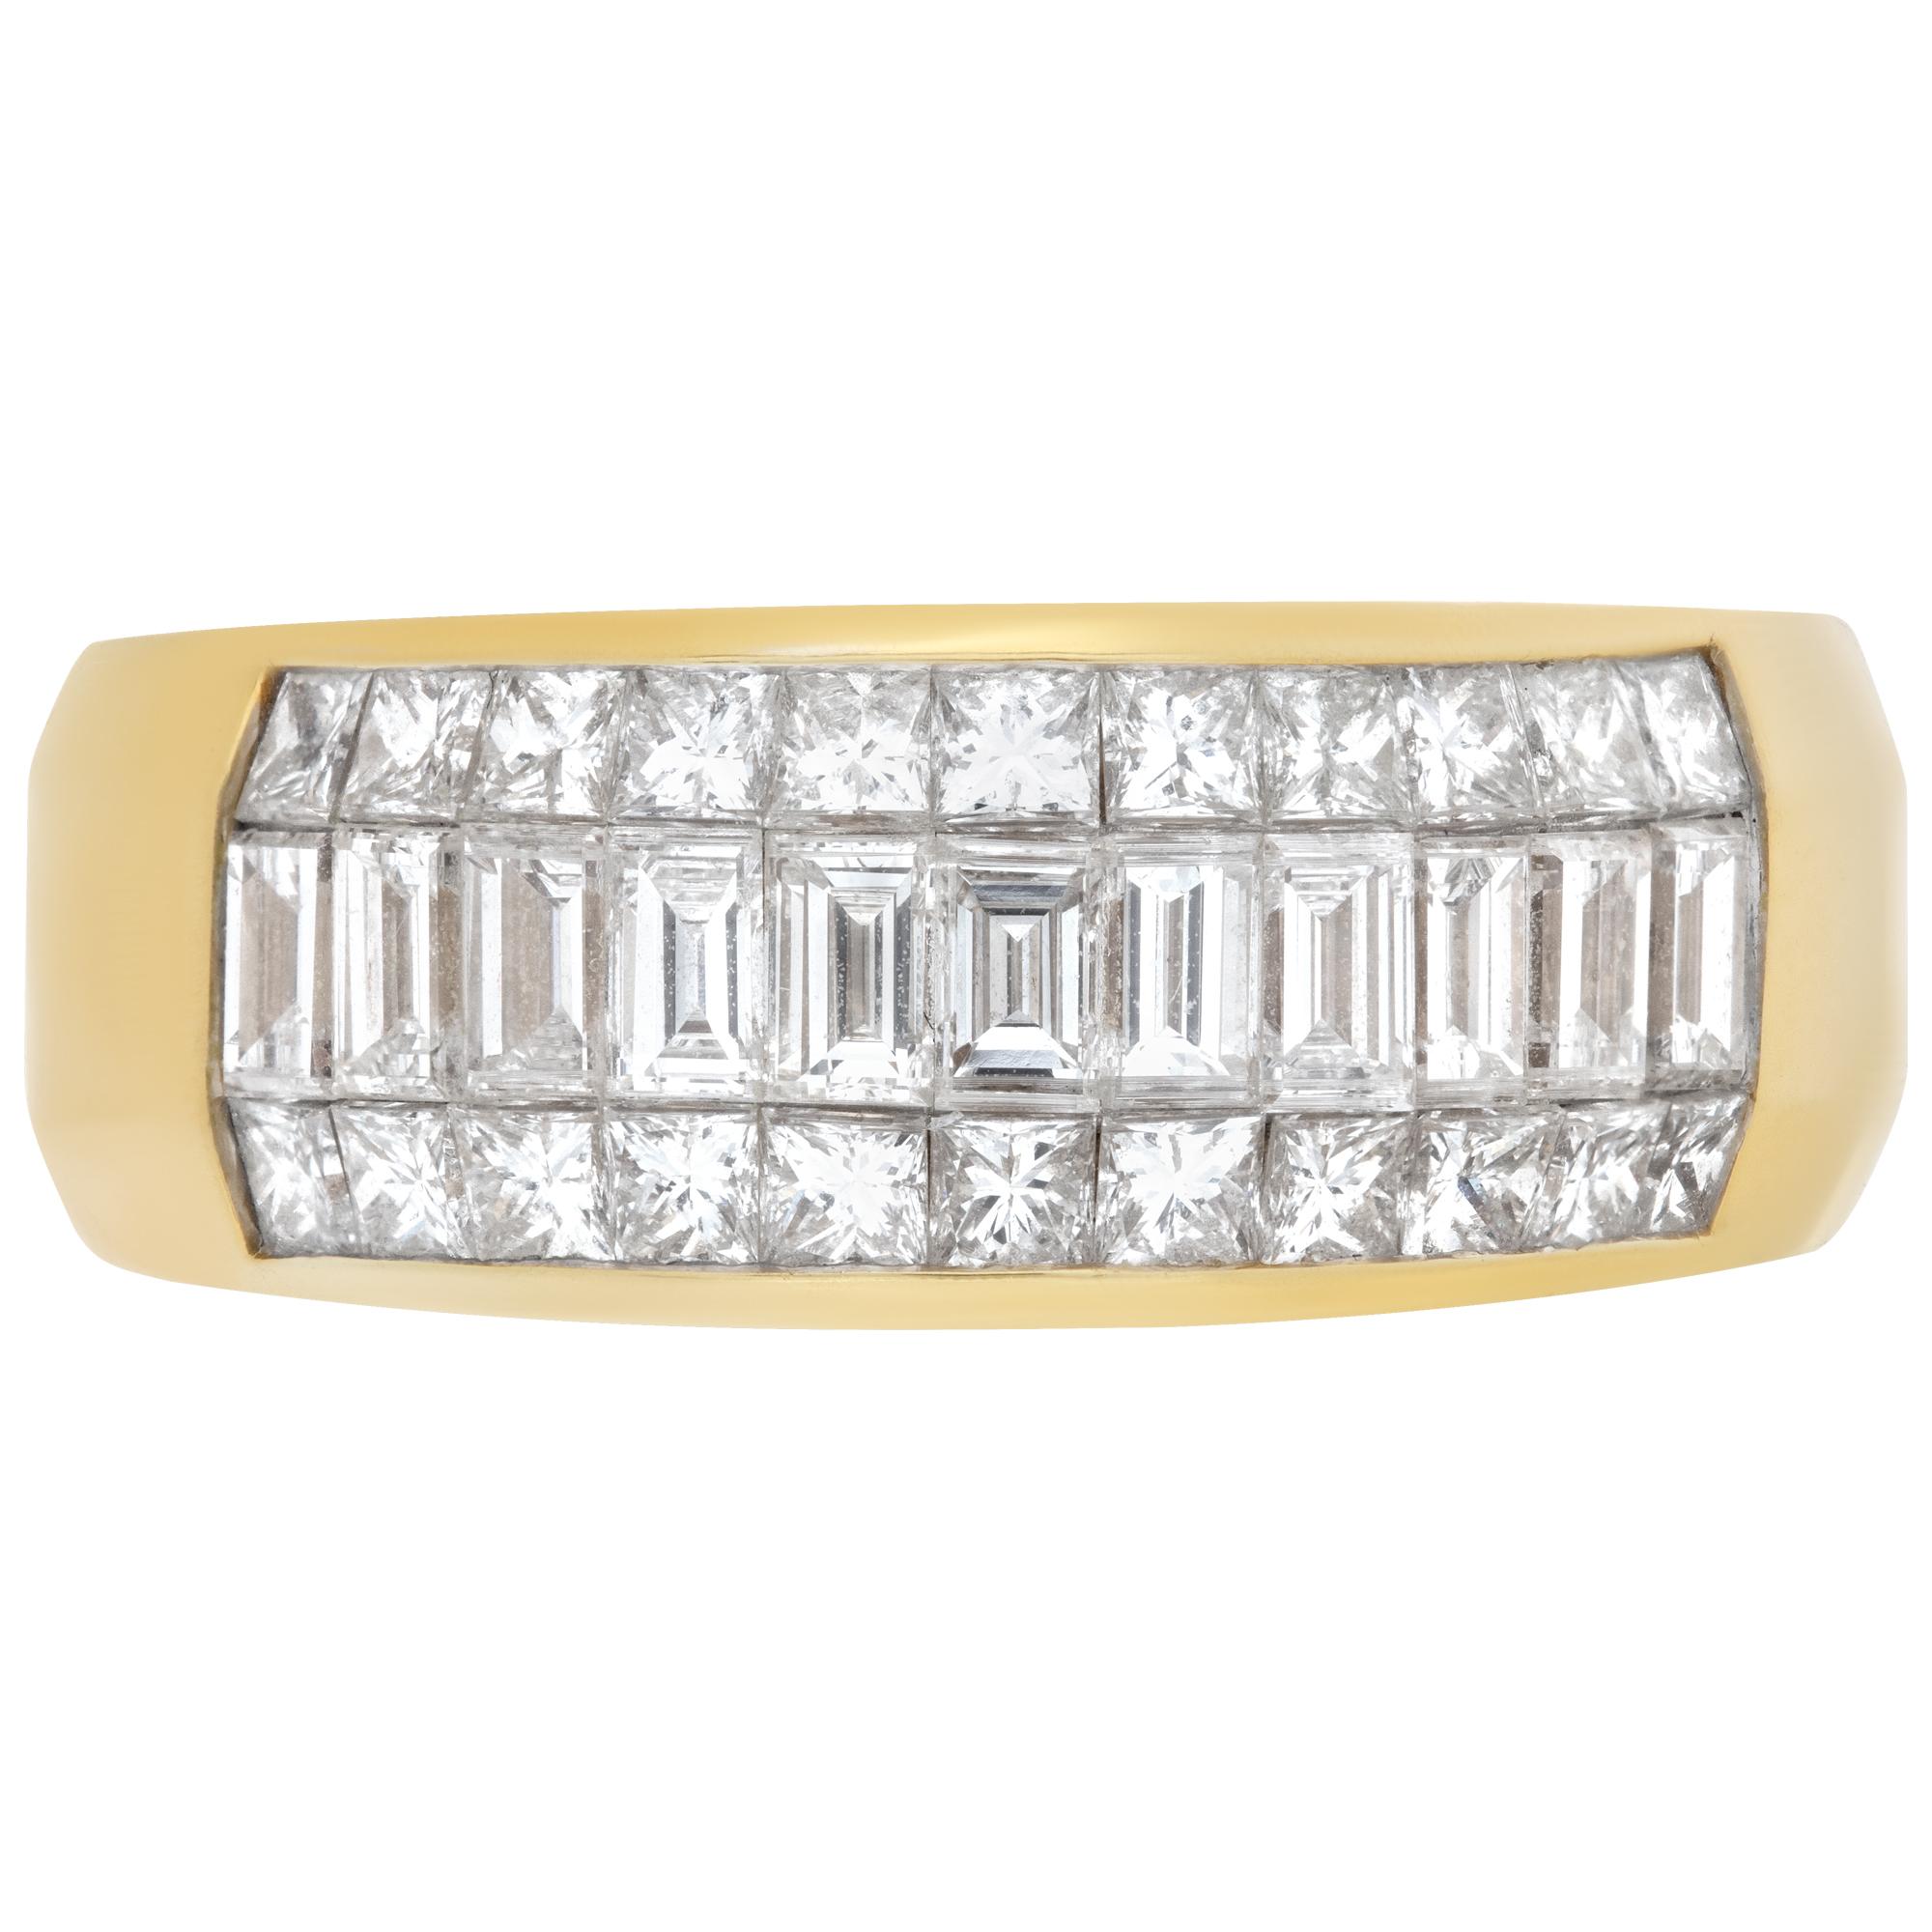 Beautiful princess and emerald cut diamond ring in 18k gold with approximately 2 carats in G-H color, VS-SI clarity diamonds. Size 8.75<br /><br />This Diamond ring is currently size 8.75 and some items can be sized up or down, please ask! It weighs